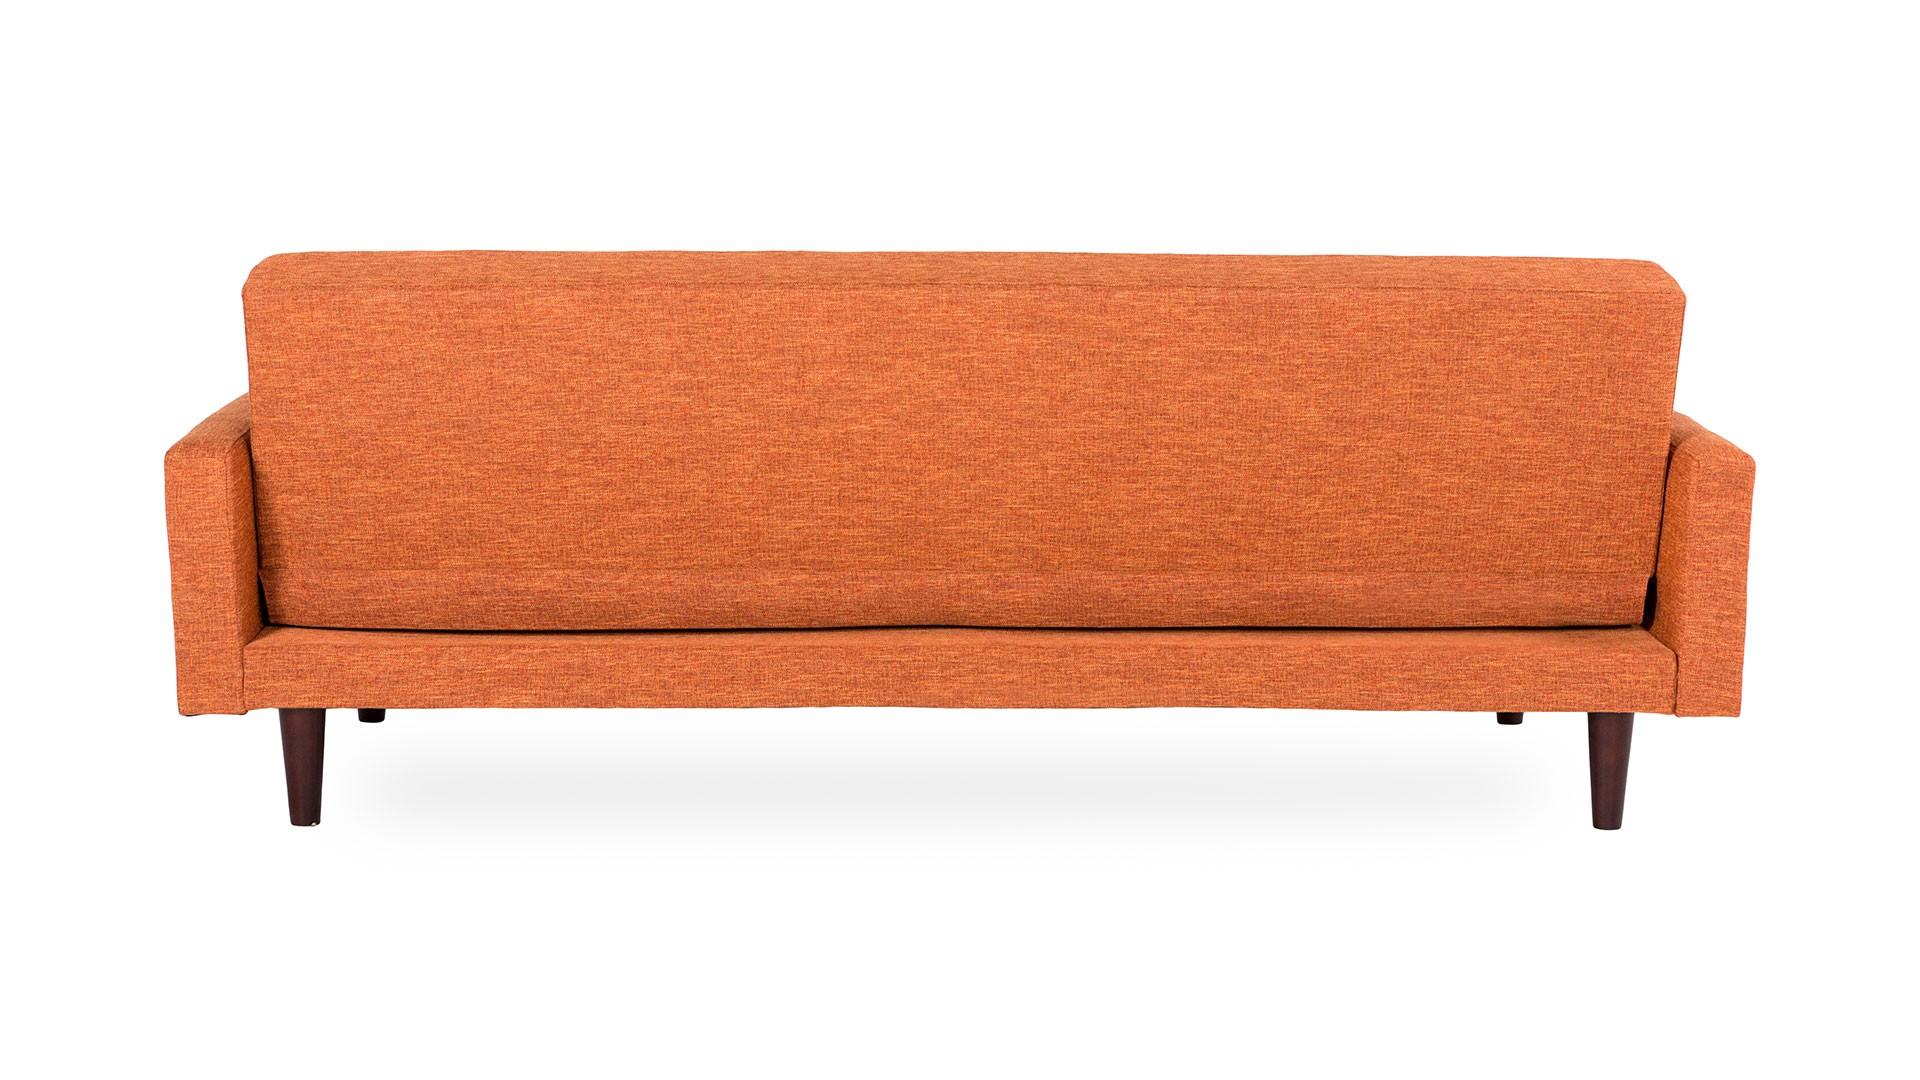 

    
At Home USA VItalia Sofa Sleeper in Orange Tufted Buttons Contemporary Style
